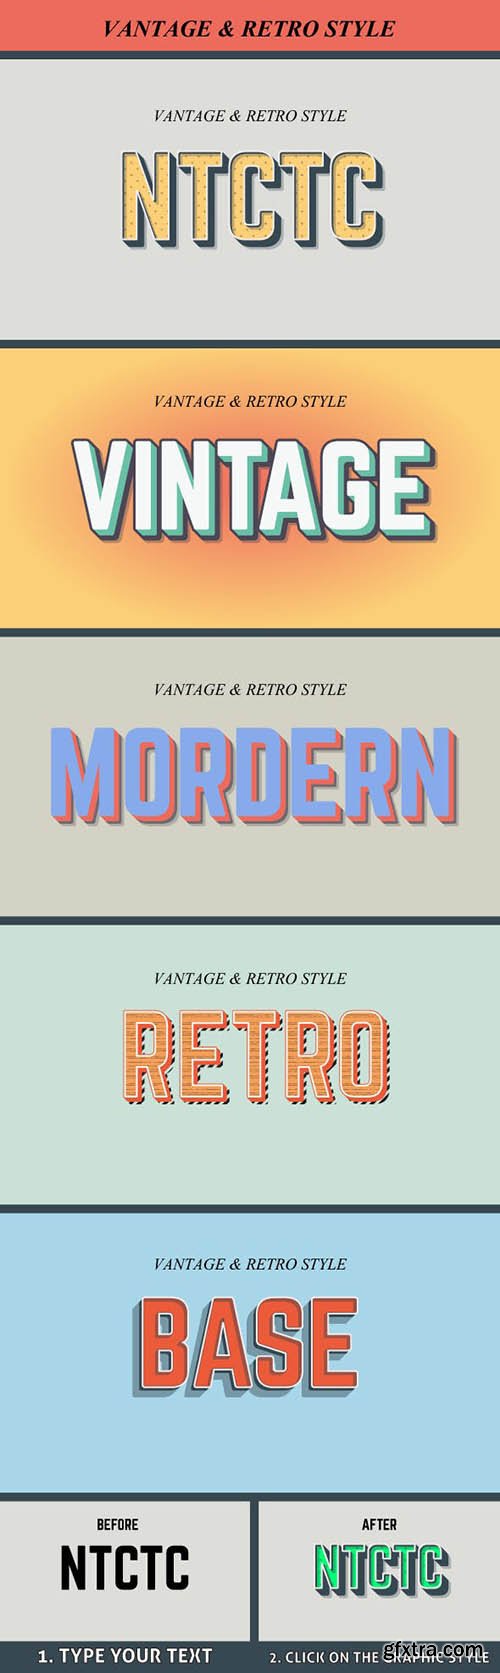 Graphicriver Vintage and Retro Graphic Style 22987787